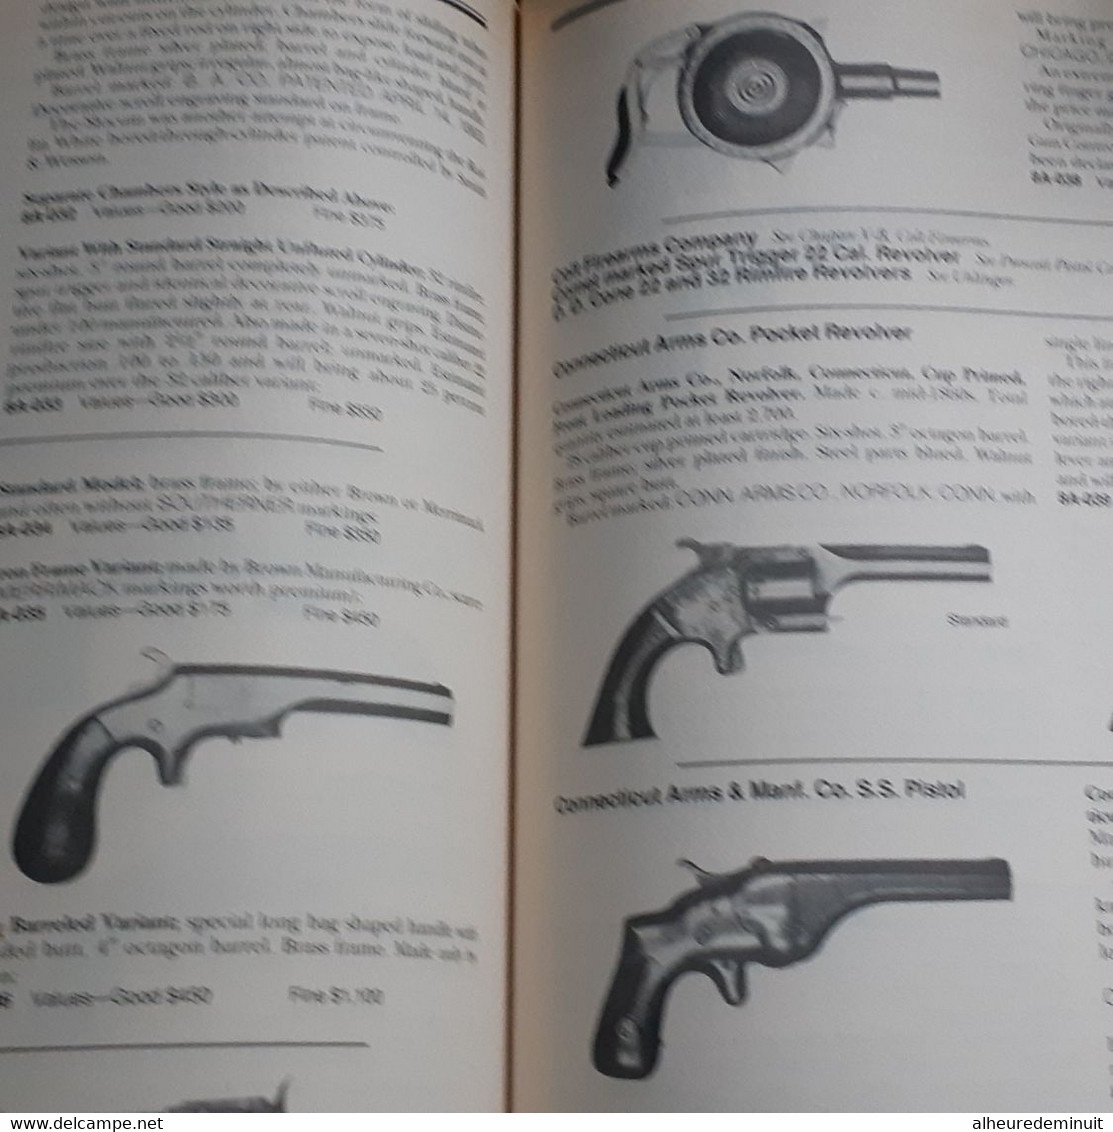 flayderman's guide to antique american firearms"1990"Armes"fusils"révolvers"complete handbook of American gun collecting